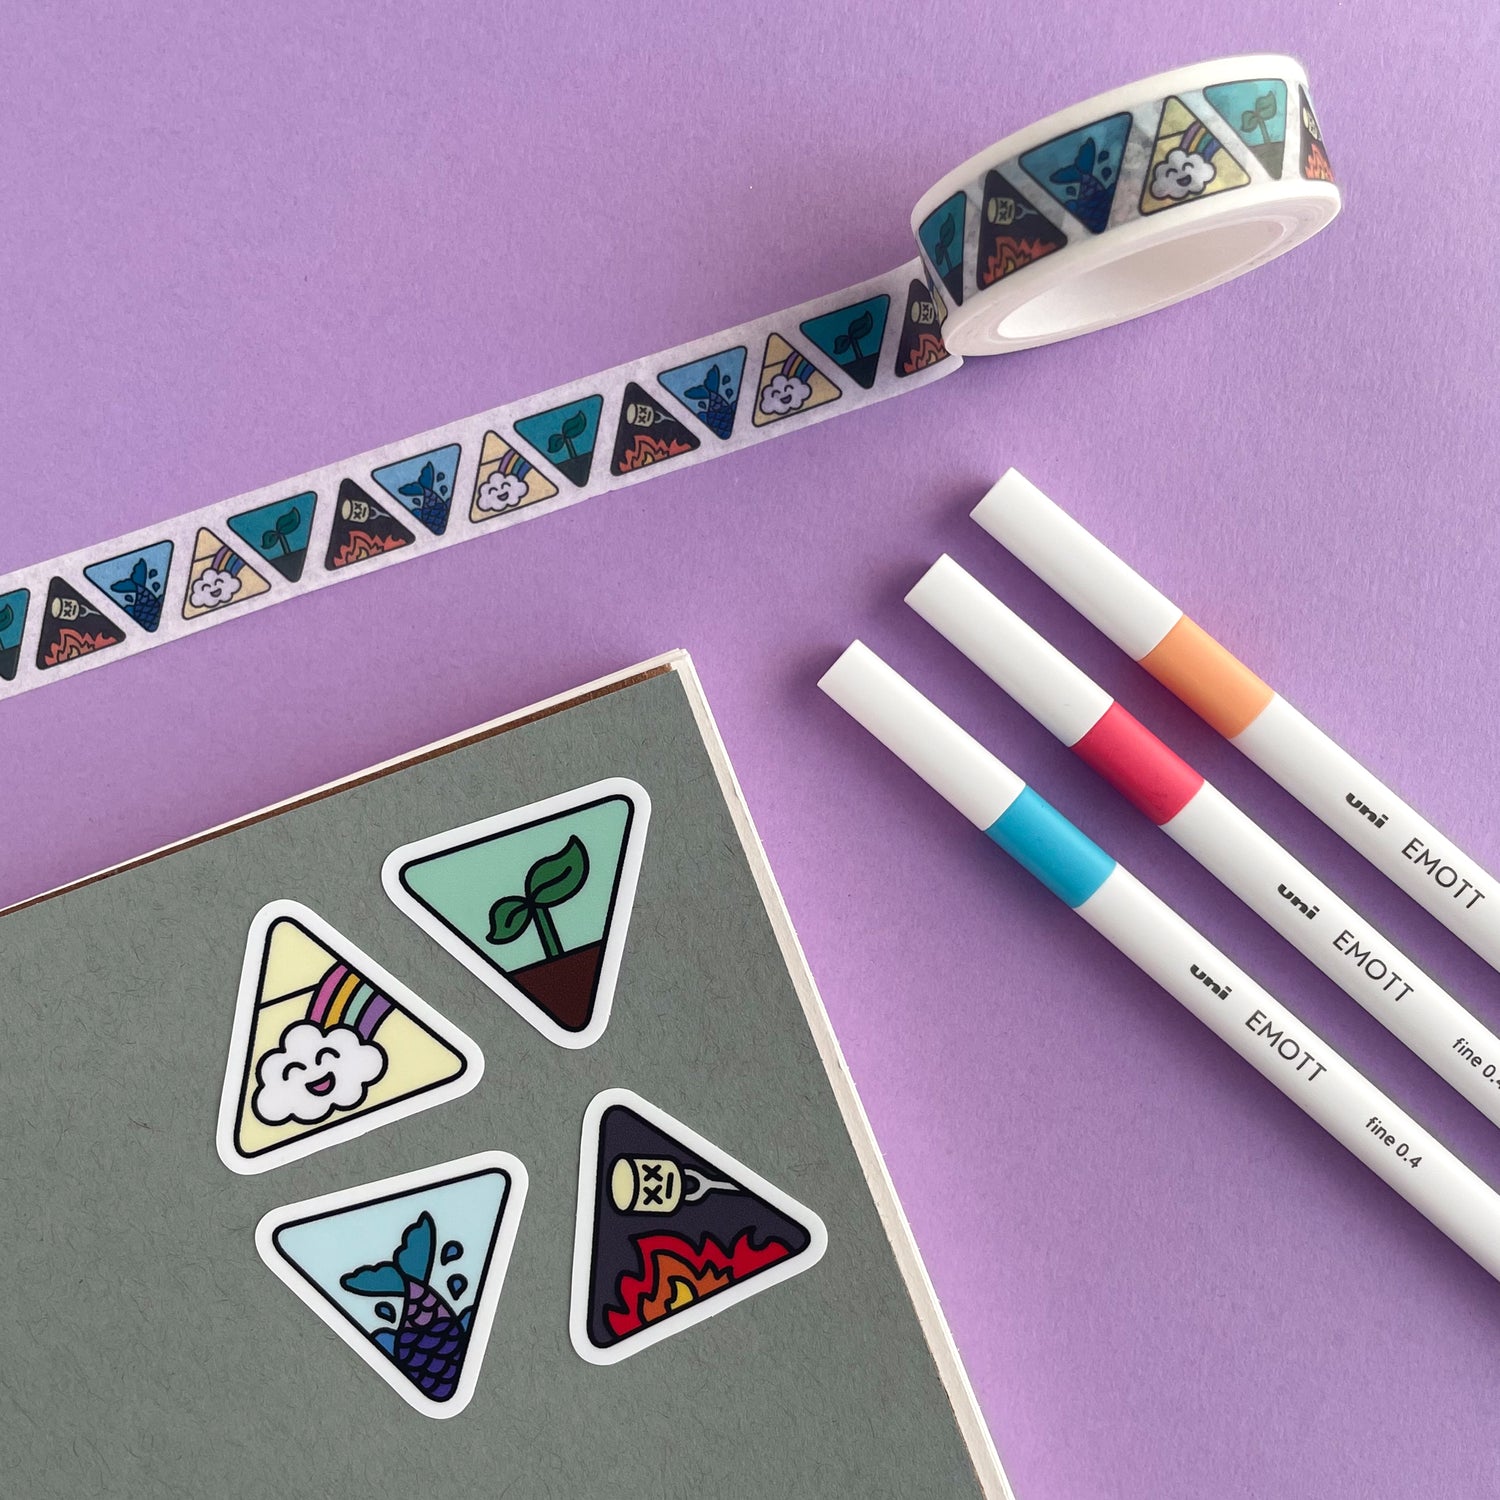 A grey notebook with stickers on it that are triangle shaped and have different cute representations of the four elements on them. There are some white pens and a roll of washi tape that matches the stickers around the notebook. All of this is on a lavender background.